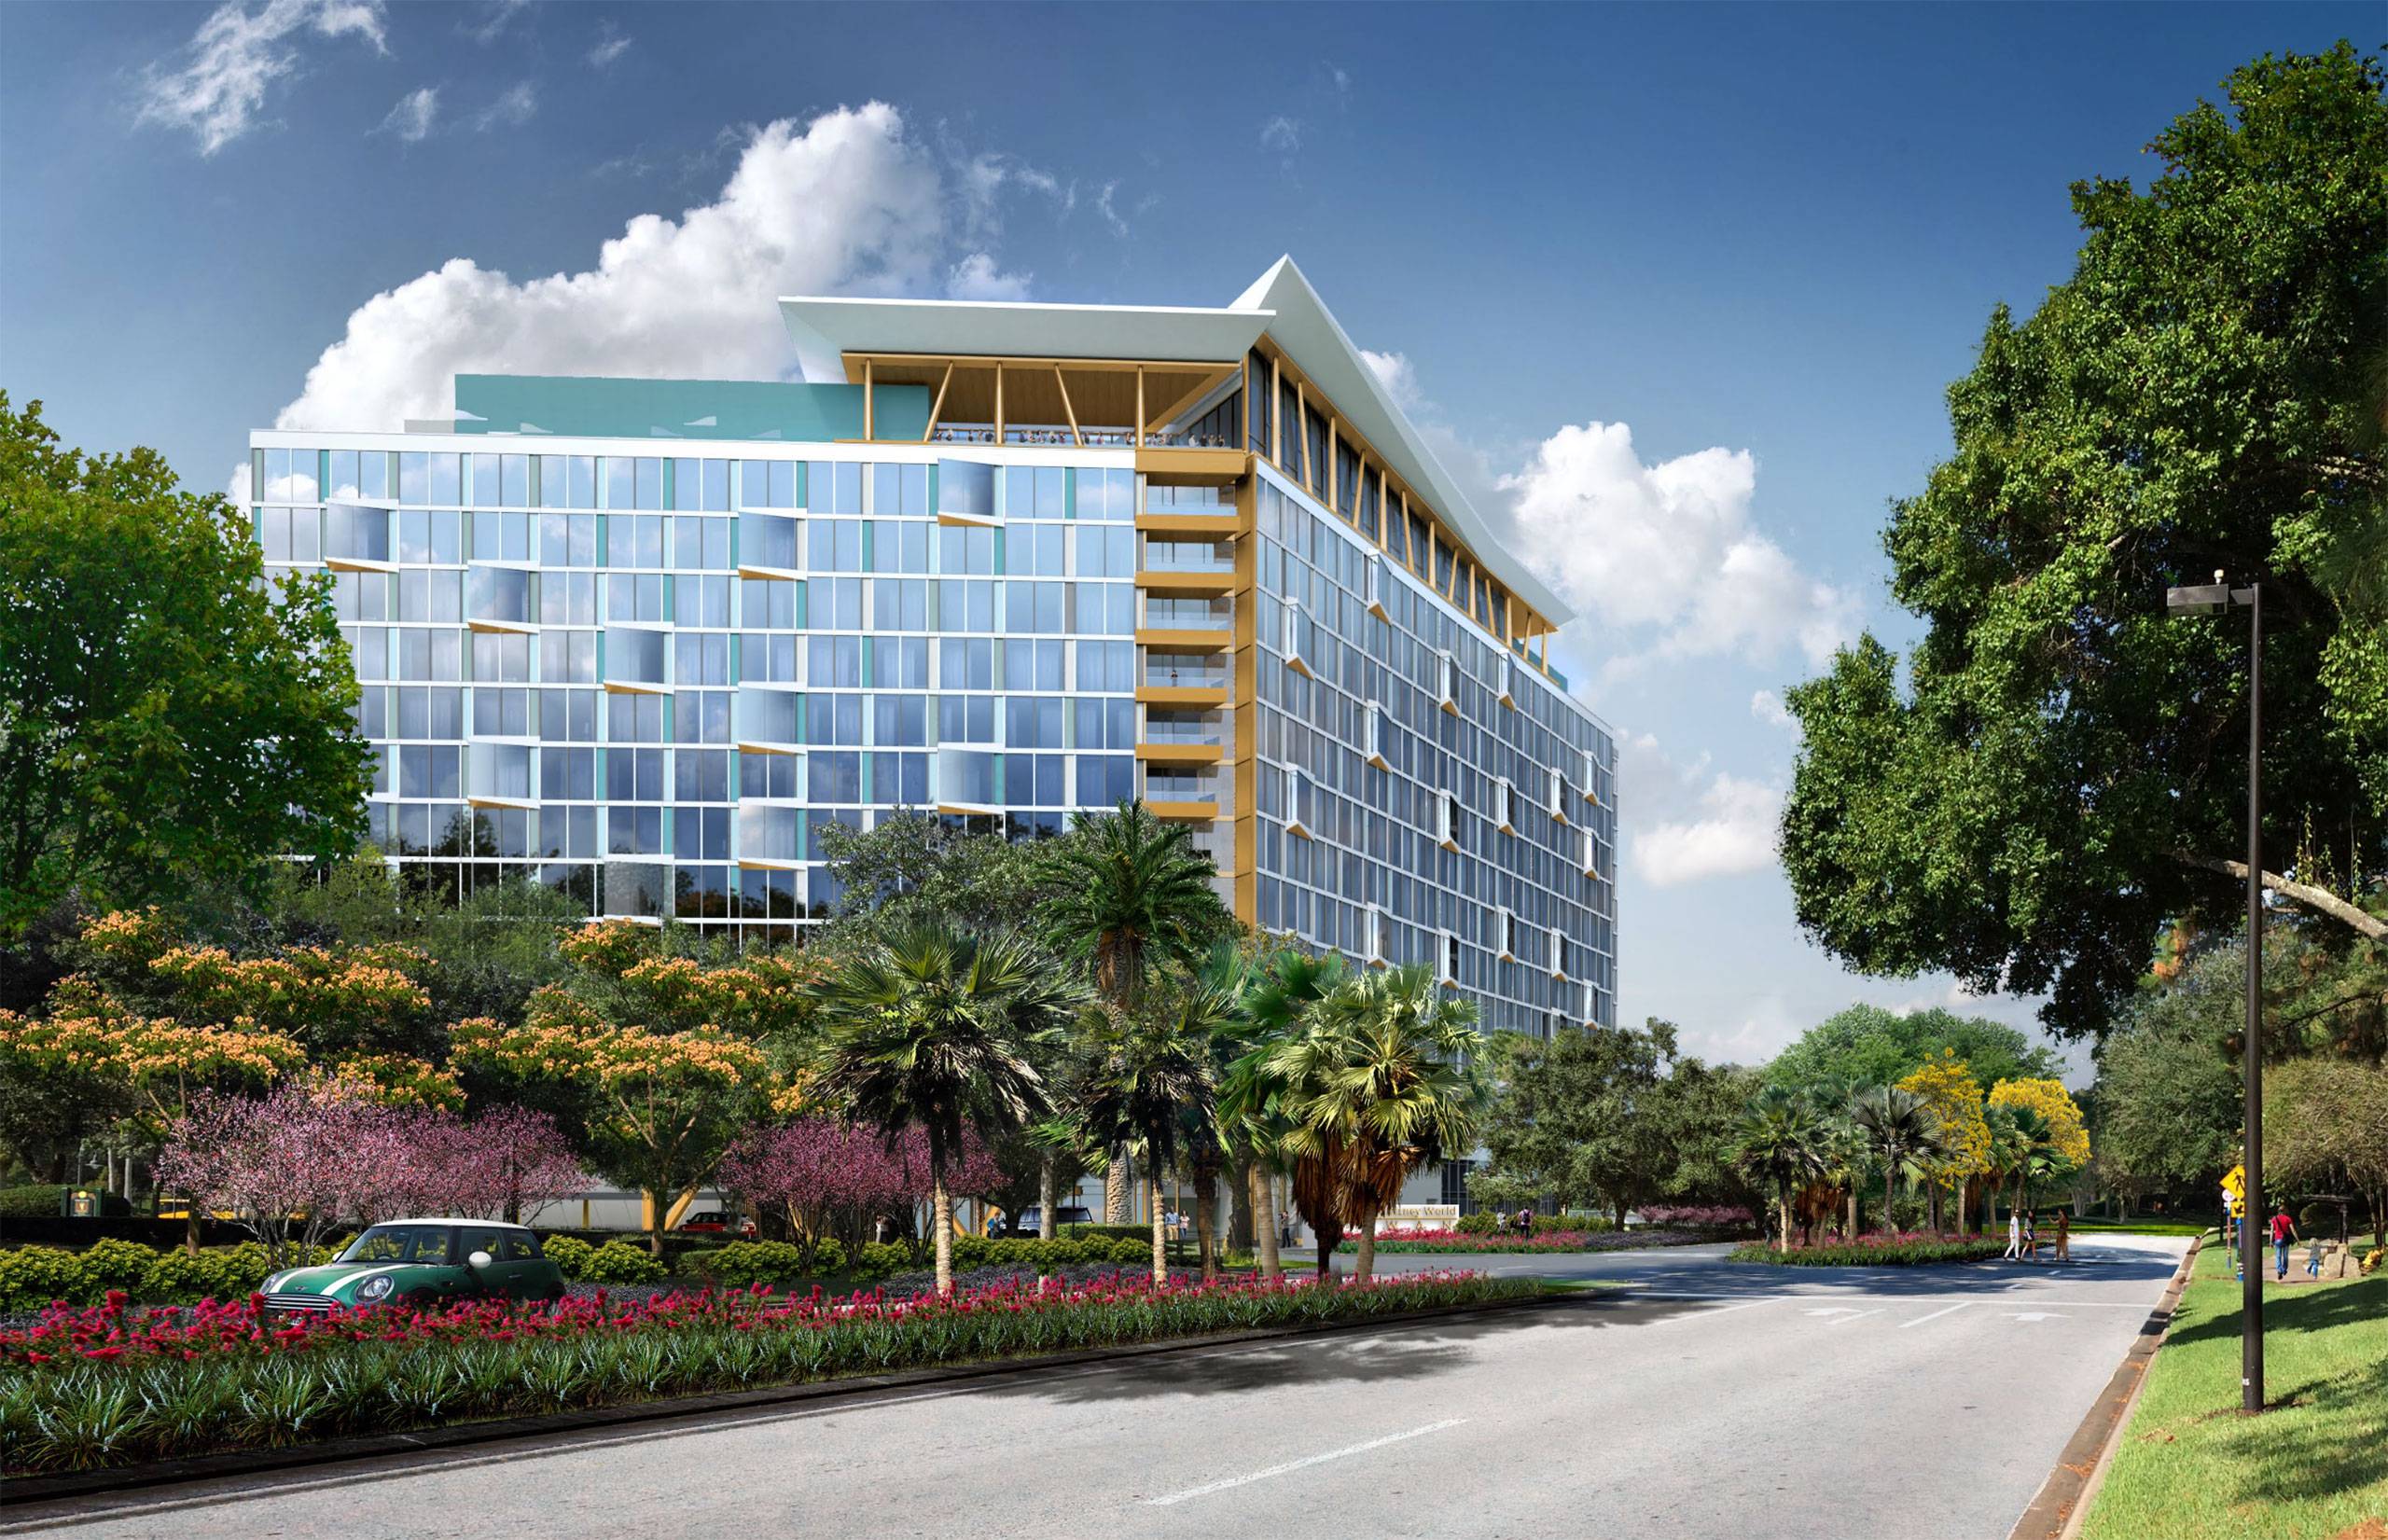 Concept art of the new Walt Disney World Swan and Dolphin Resort tower